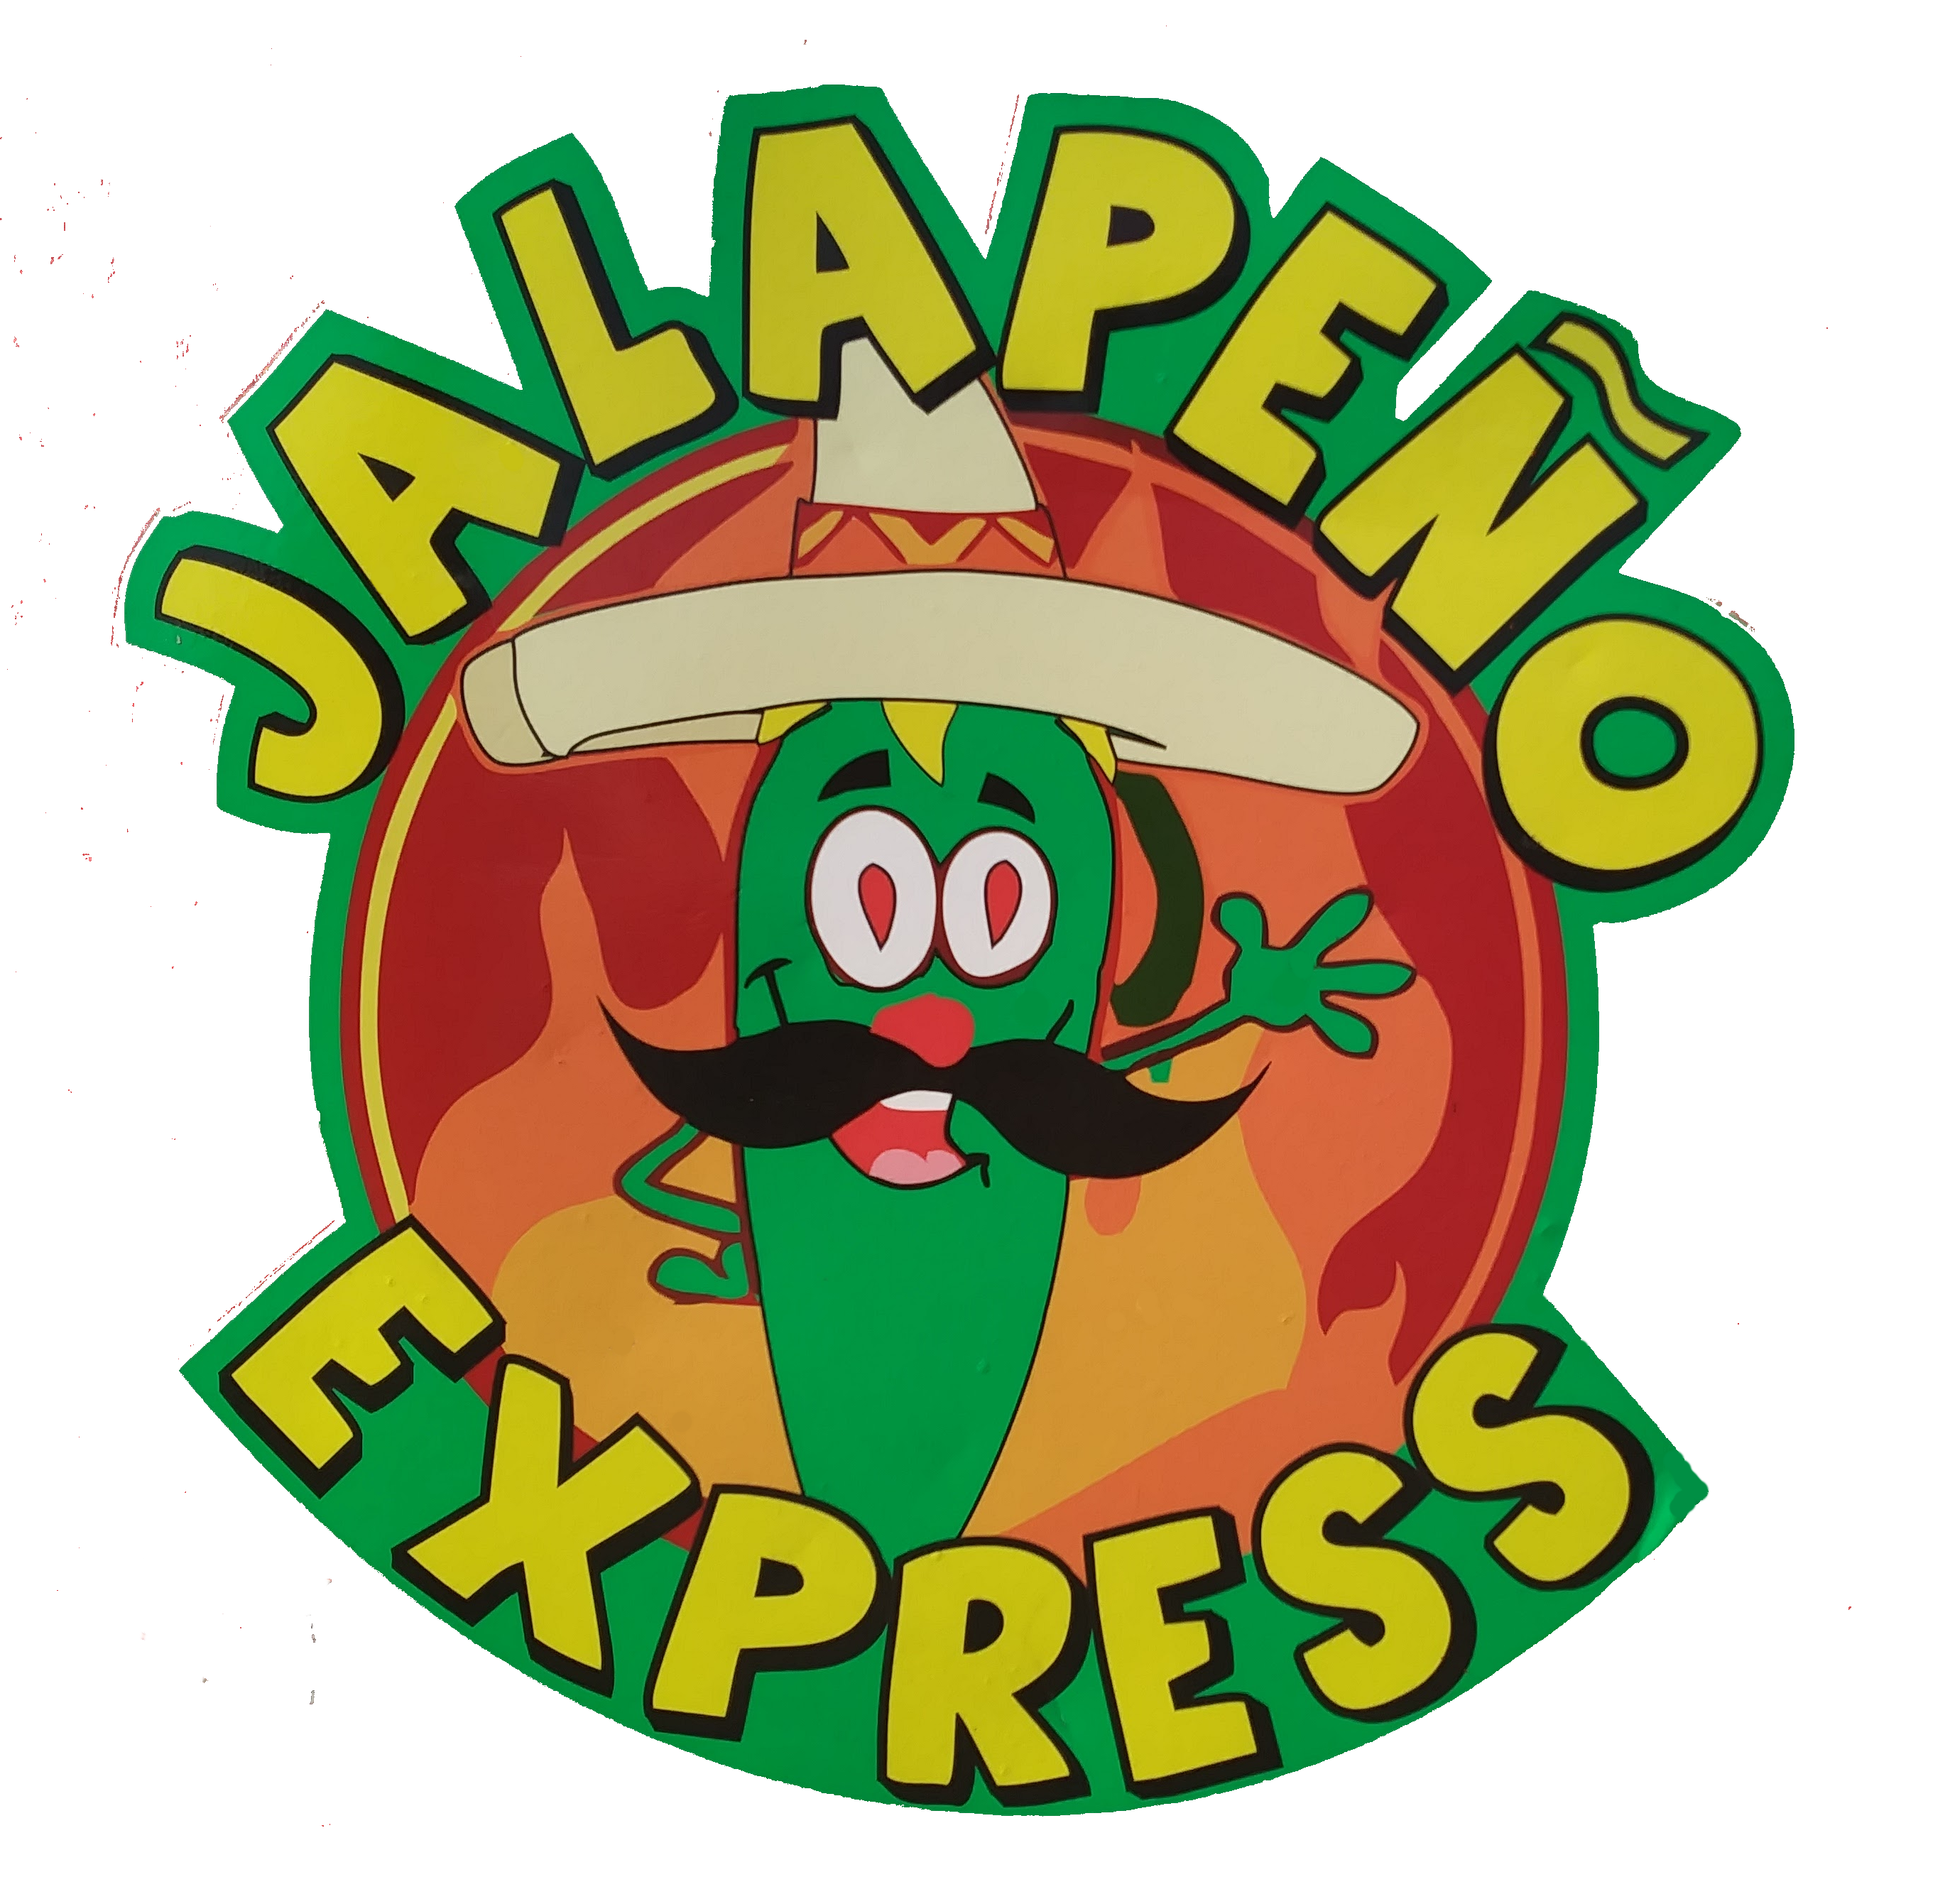 jalapeno clipart cool